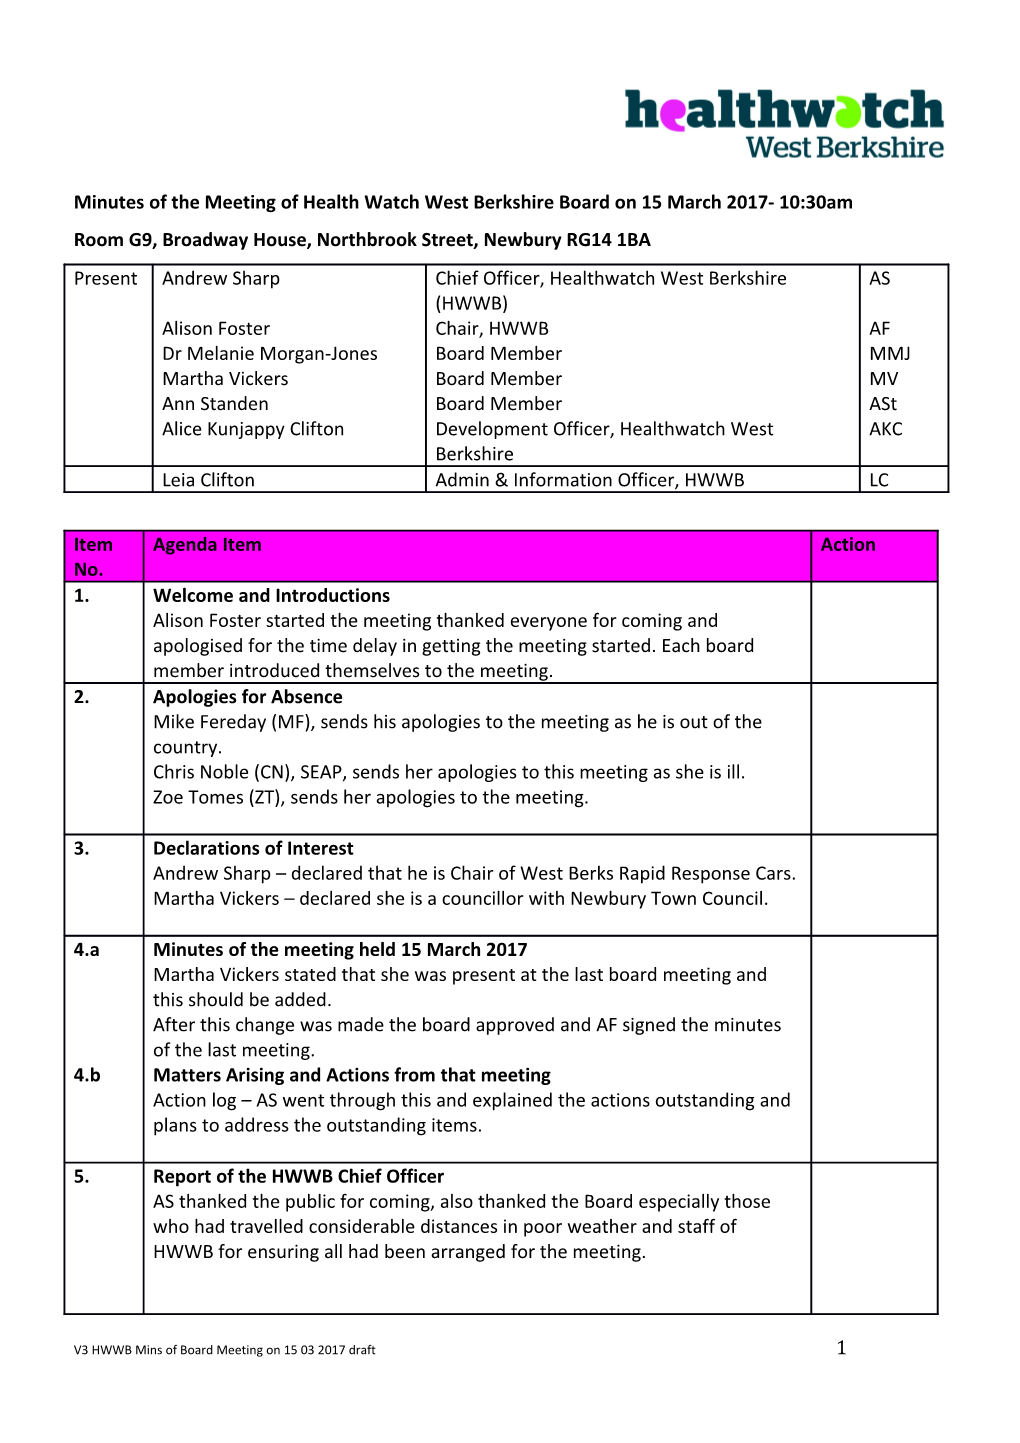 Minutes of the Meeting of Health Watch West Berkshire Board on 15 March 2017- 10:30Am